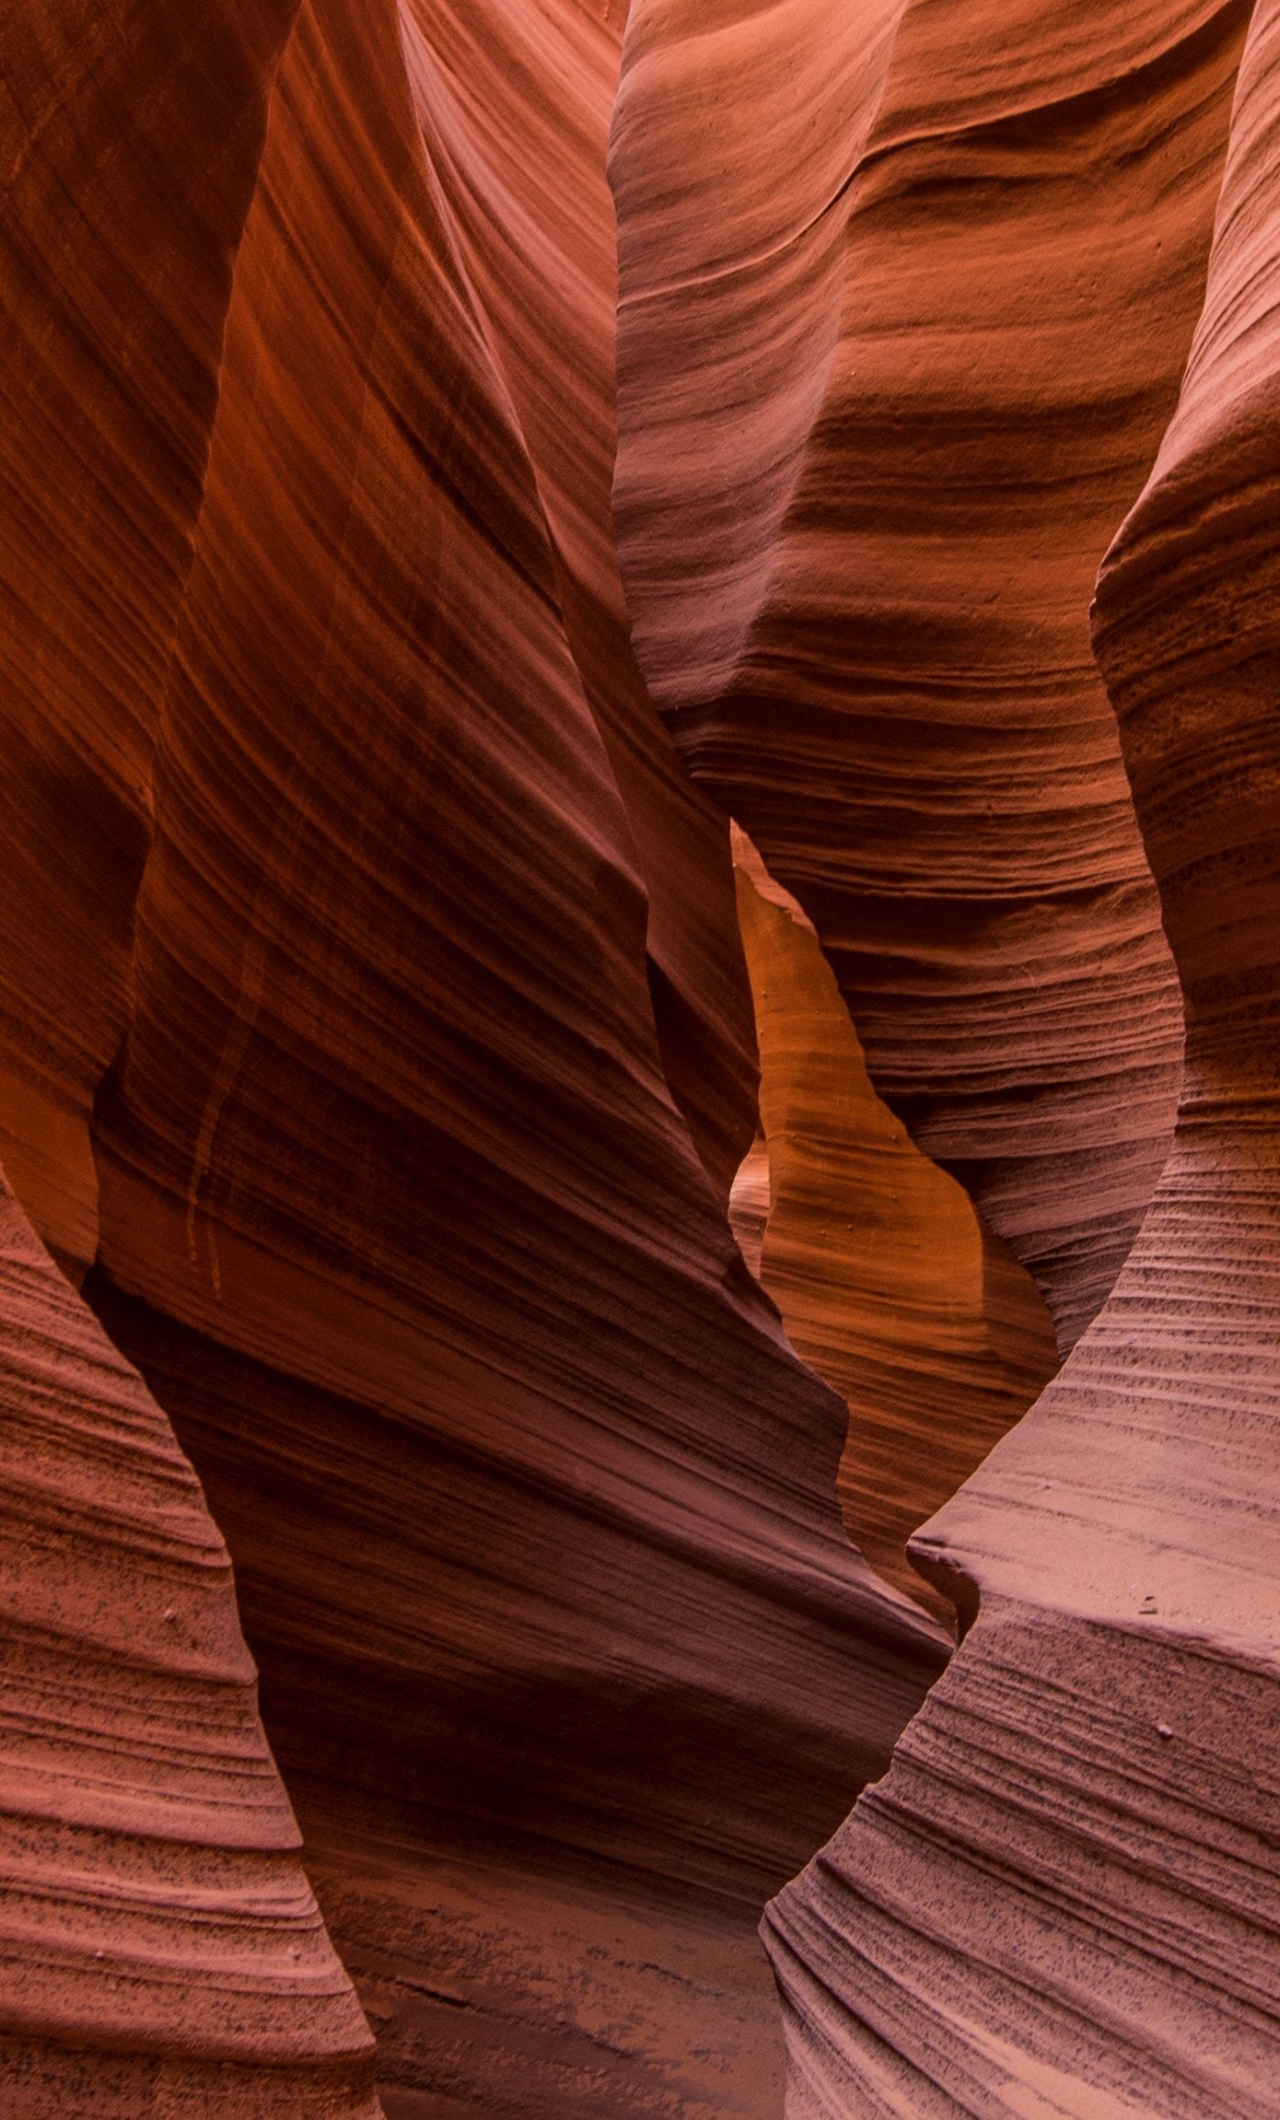 Download wallpaper 1280x2120 antelope canyon, nature, usa, iphone 6 plus,  1280x2120 hd background, 6699